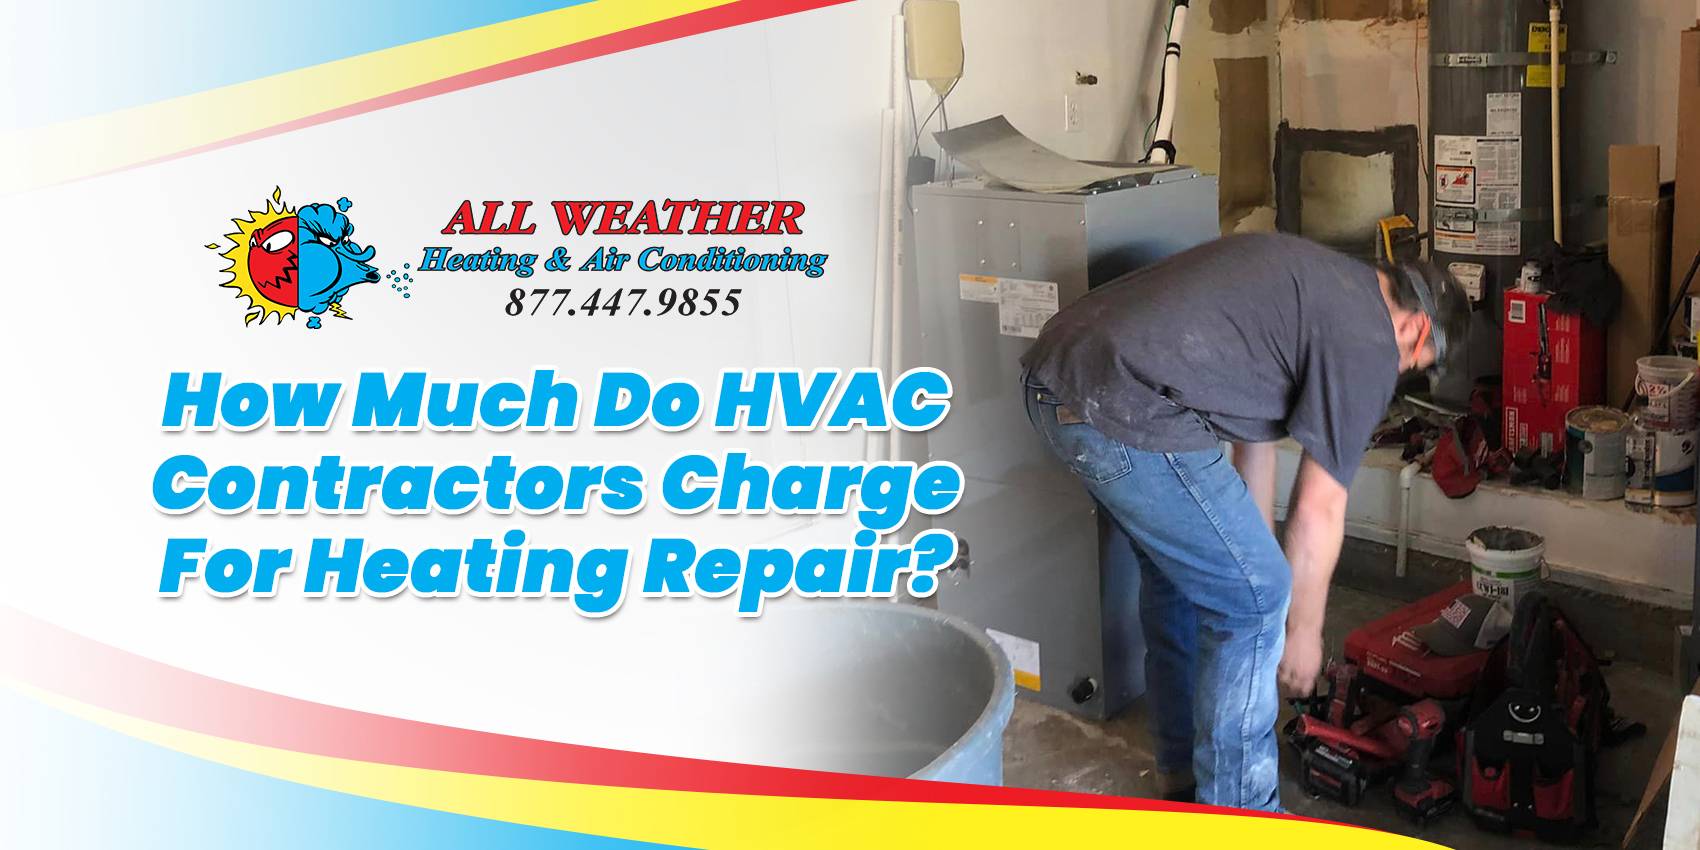 How much do HVAC contractors charge for heating repair?